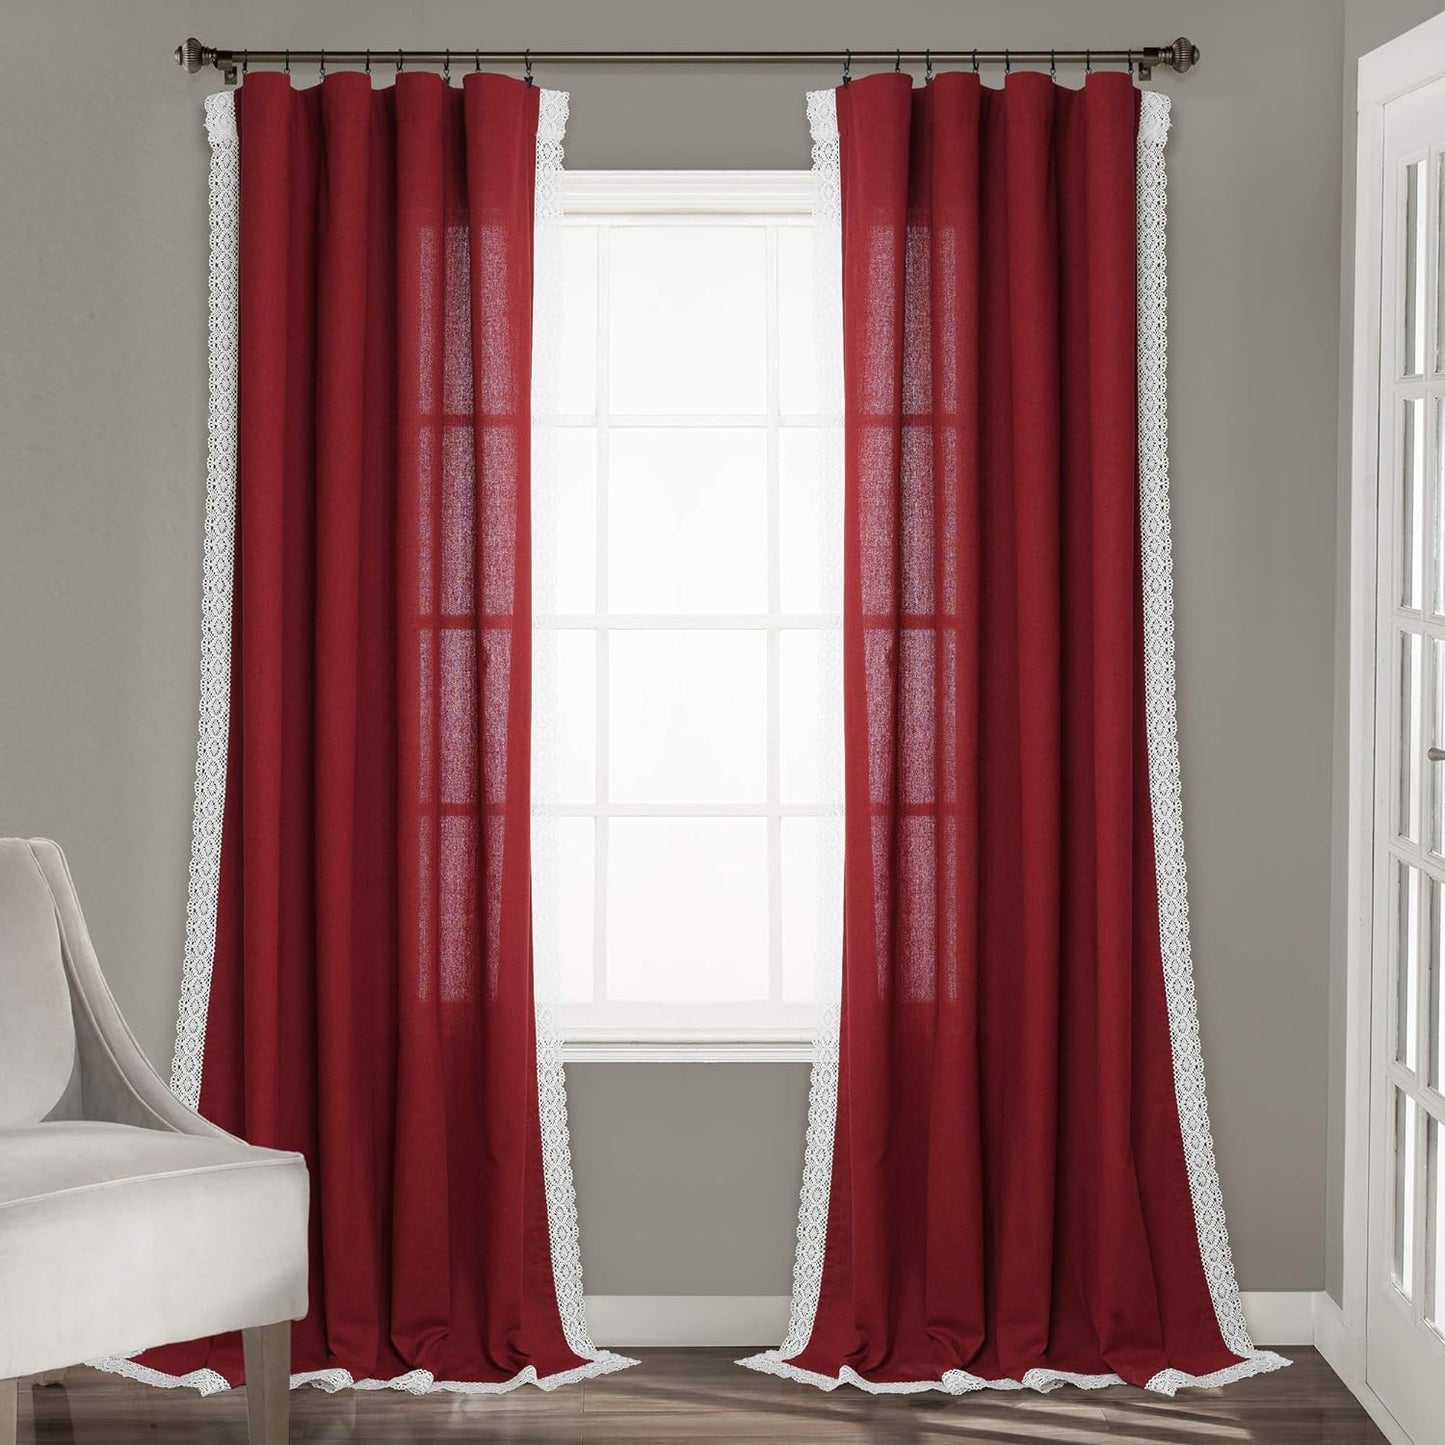 Lush Decor Rosalie Light Filtering Window Curtain Panel Set- Pair- Vintage Farmhouse & French Country Style Curtains - Timeless Dreamy Drape - Romantic Lace Trim - 54" W X 84" L, White  Triangle Home Fashions Red Window Panel 54"W X 95"L